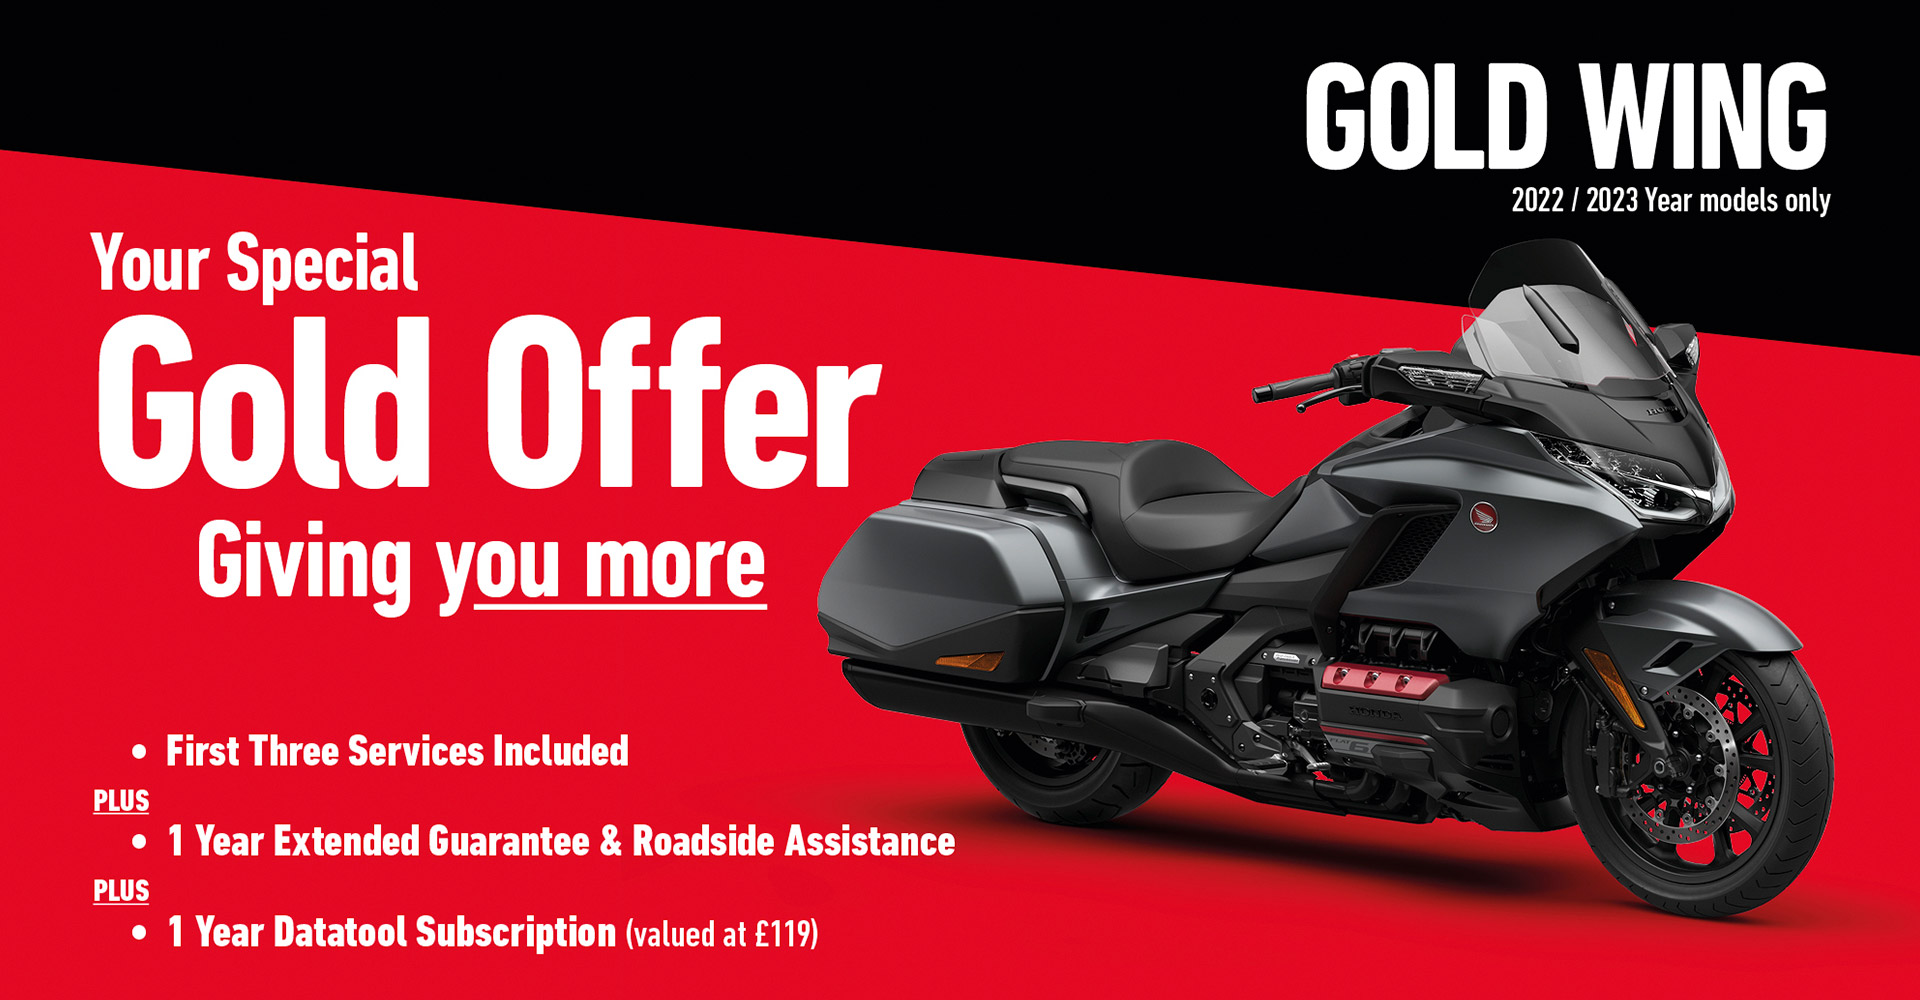 GL1800 GOLD WING 23YM Offer